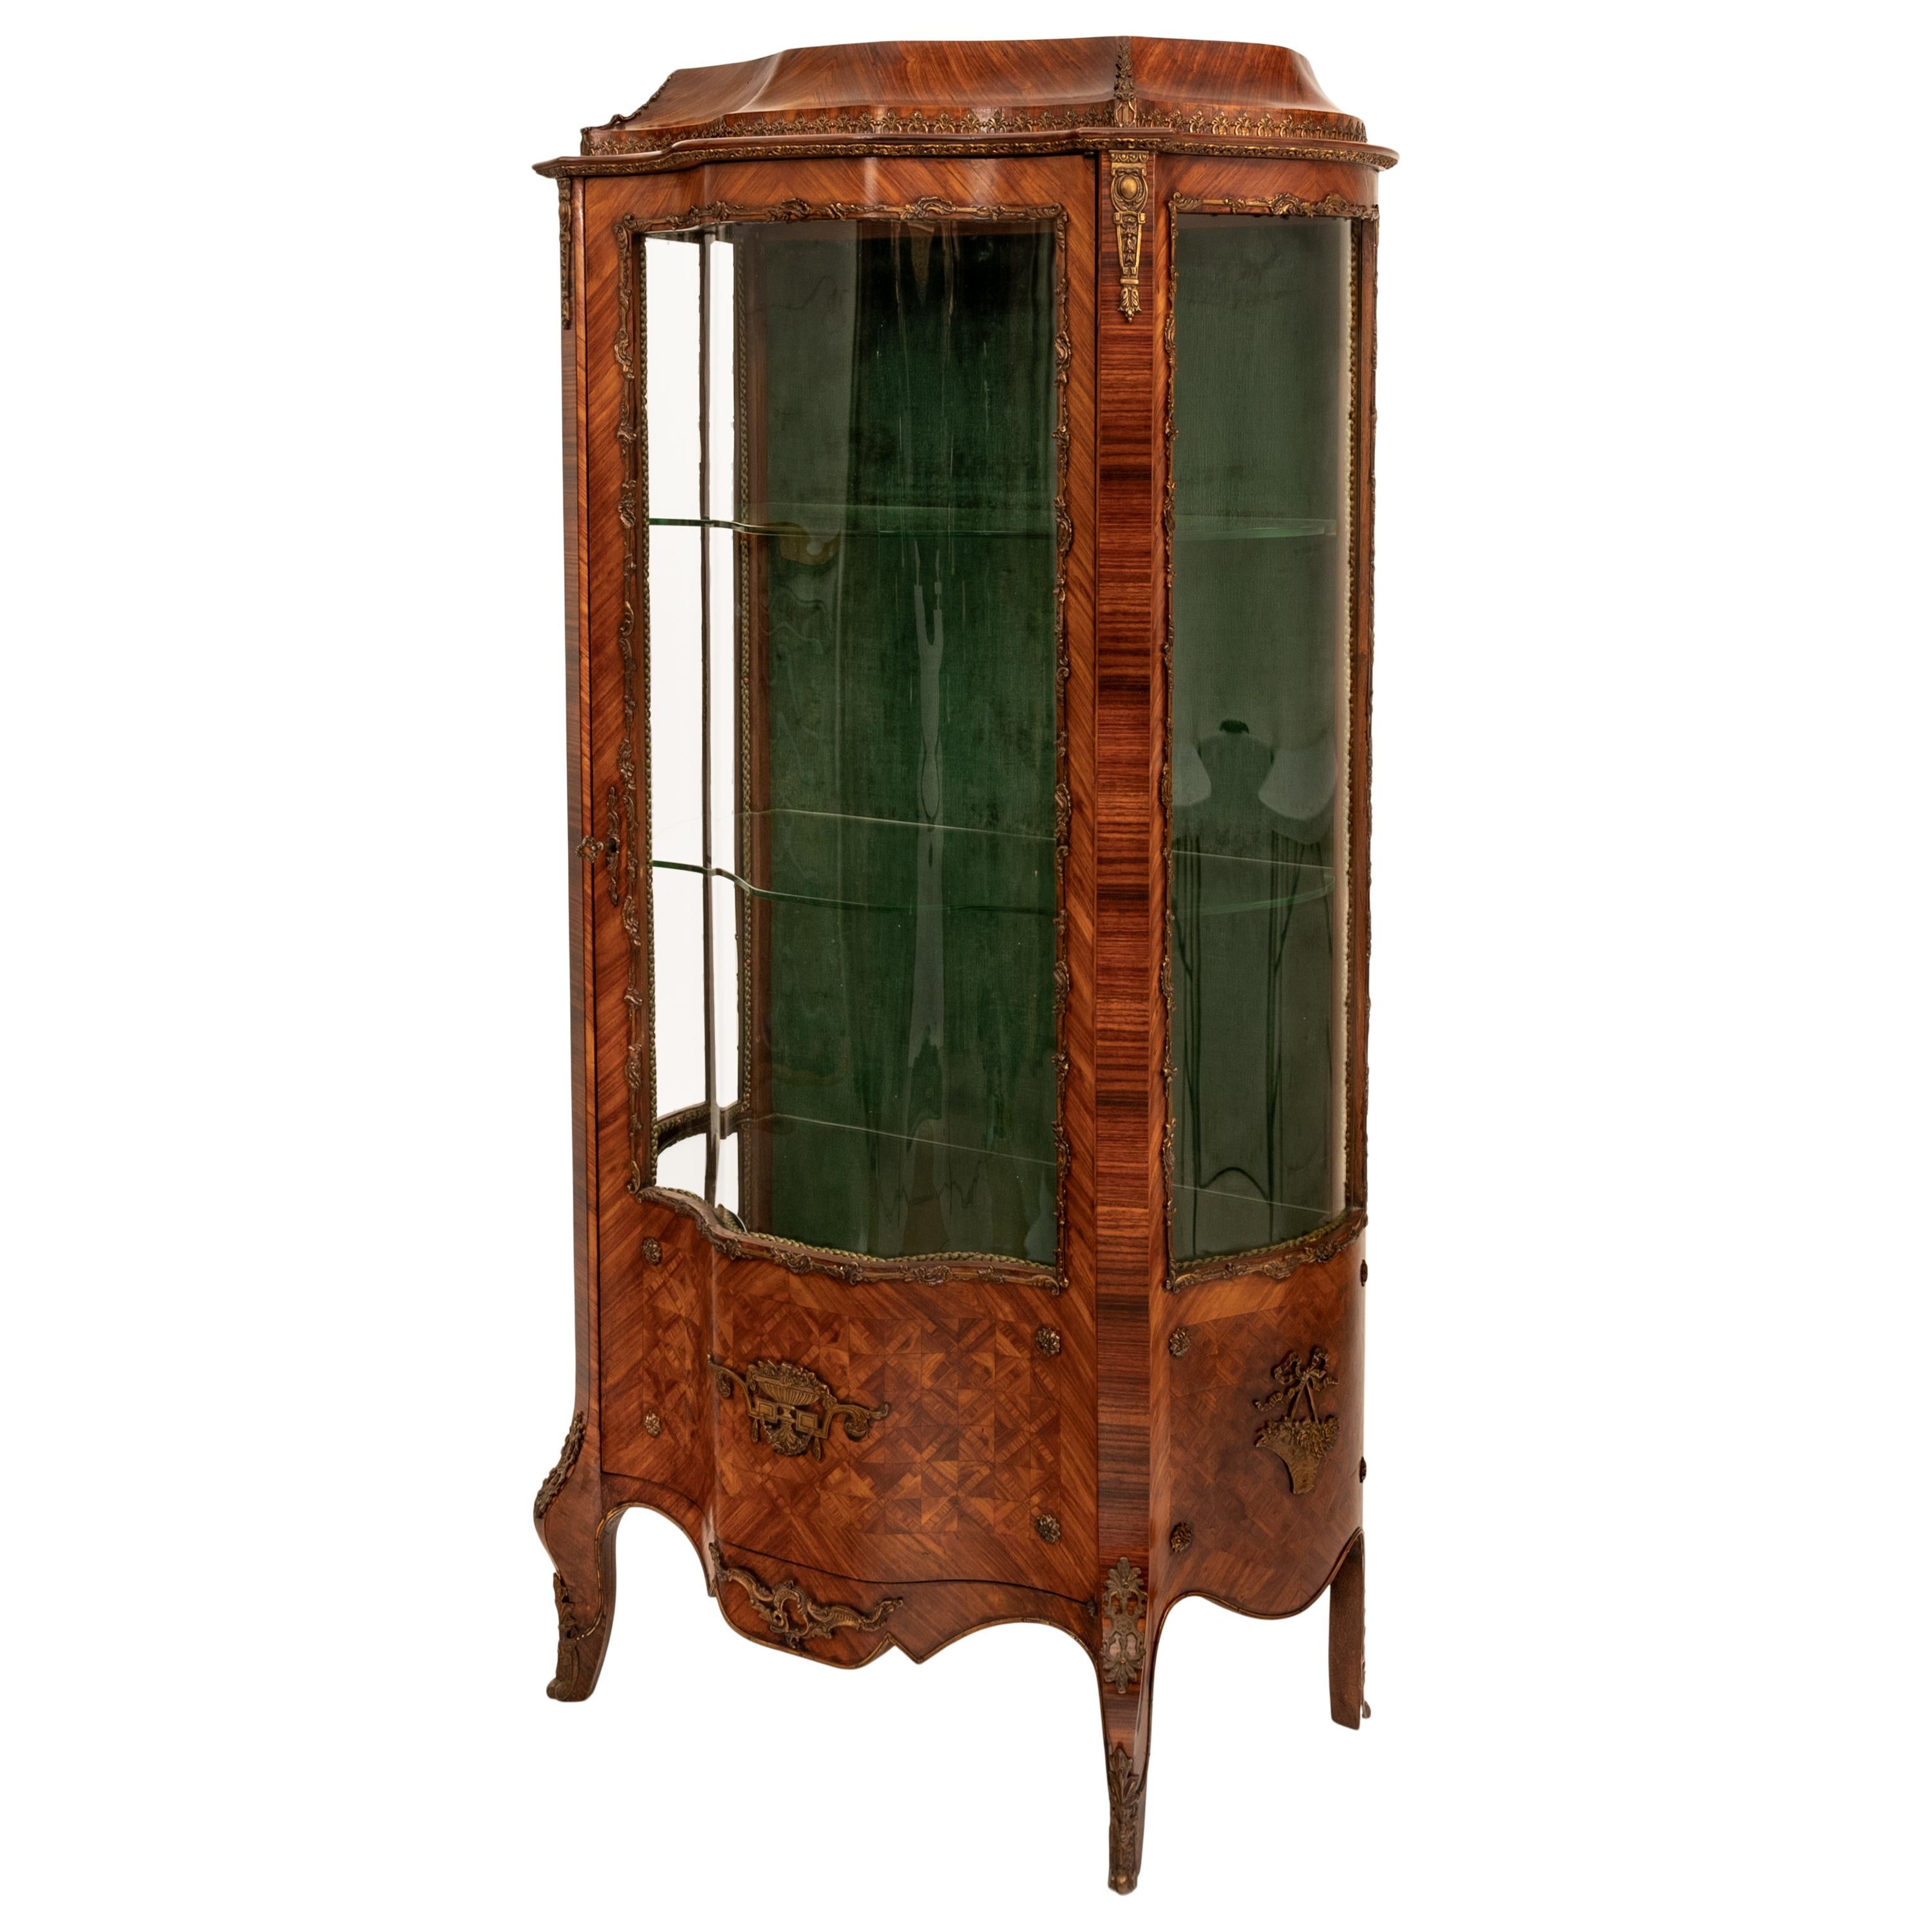 A very fine quality antique French Louis XV kingwood, marquetry & ormolu serpentine/bombe shaped vitrine cabinet, circa 1880.
The cabinet having finely cast bronze mounts and brackets to the top, with a single door having serpentine shaped glass